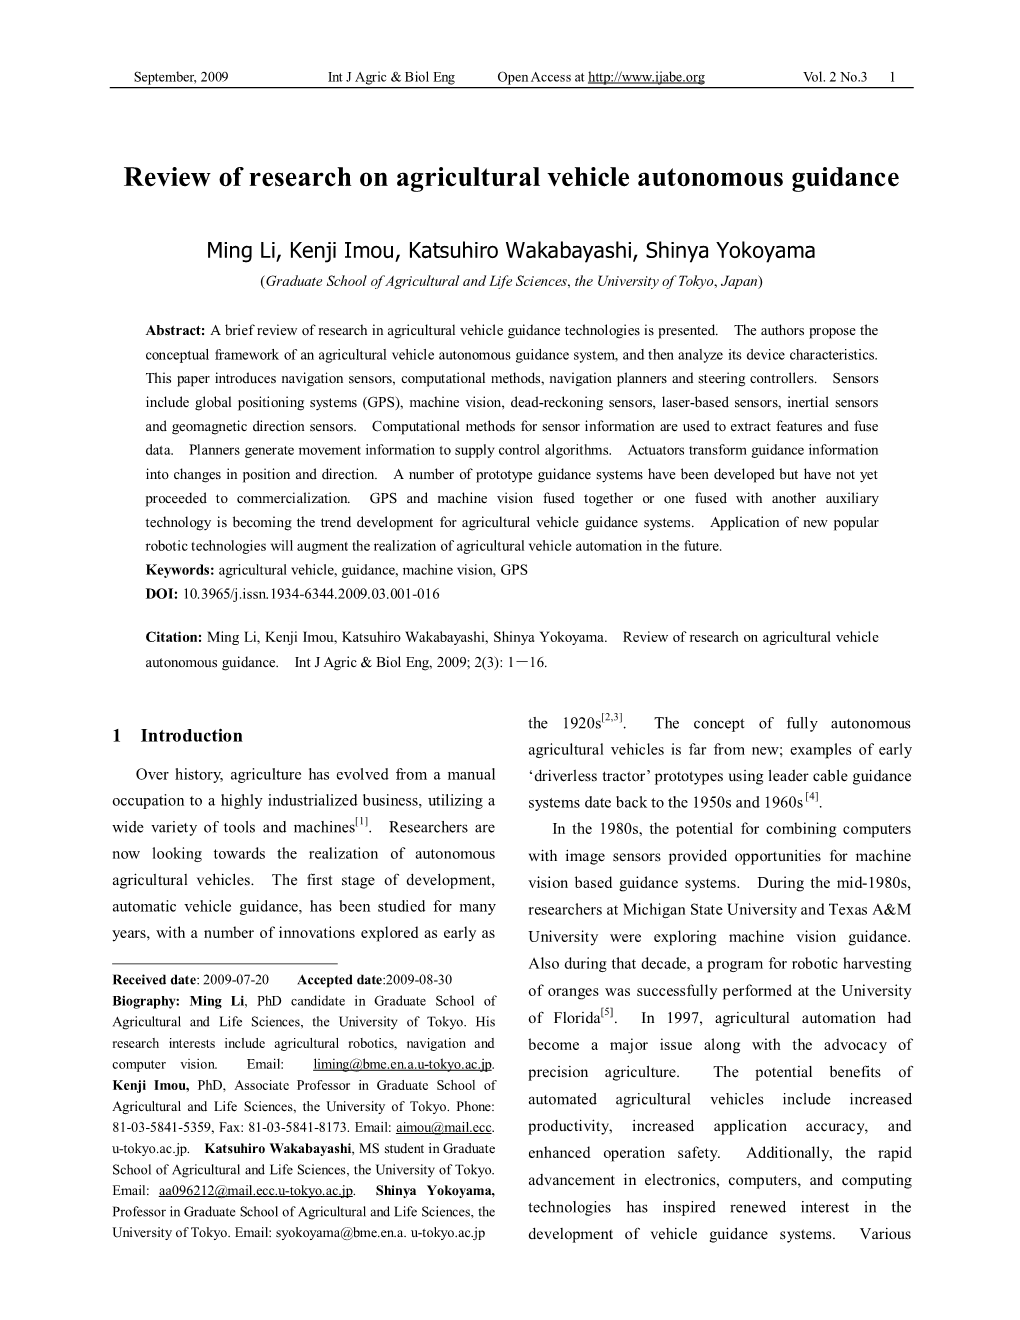 Review of Research on Agricultural Vehicle Autonomous Guidance